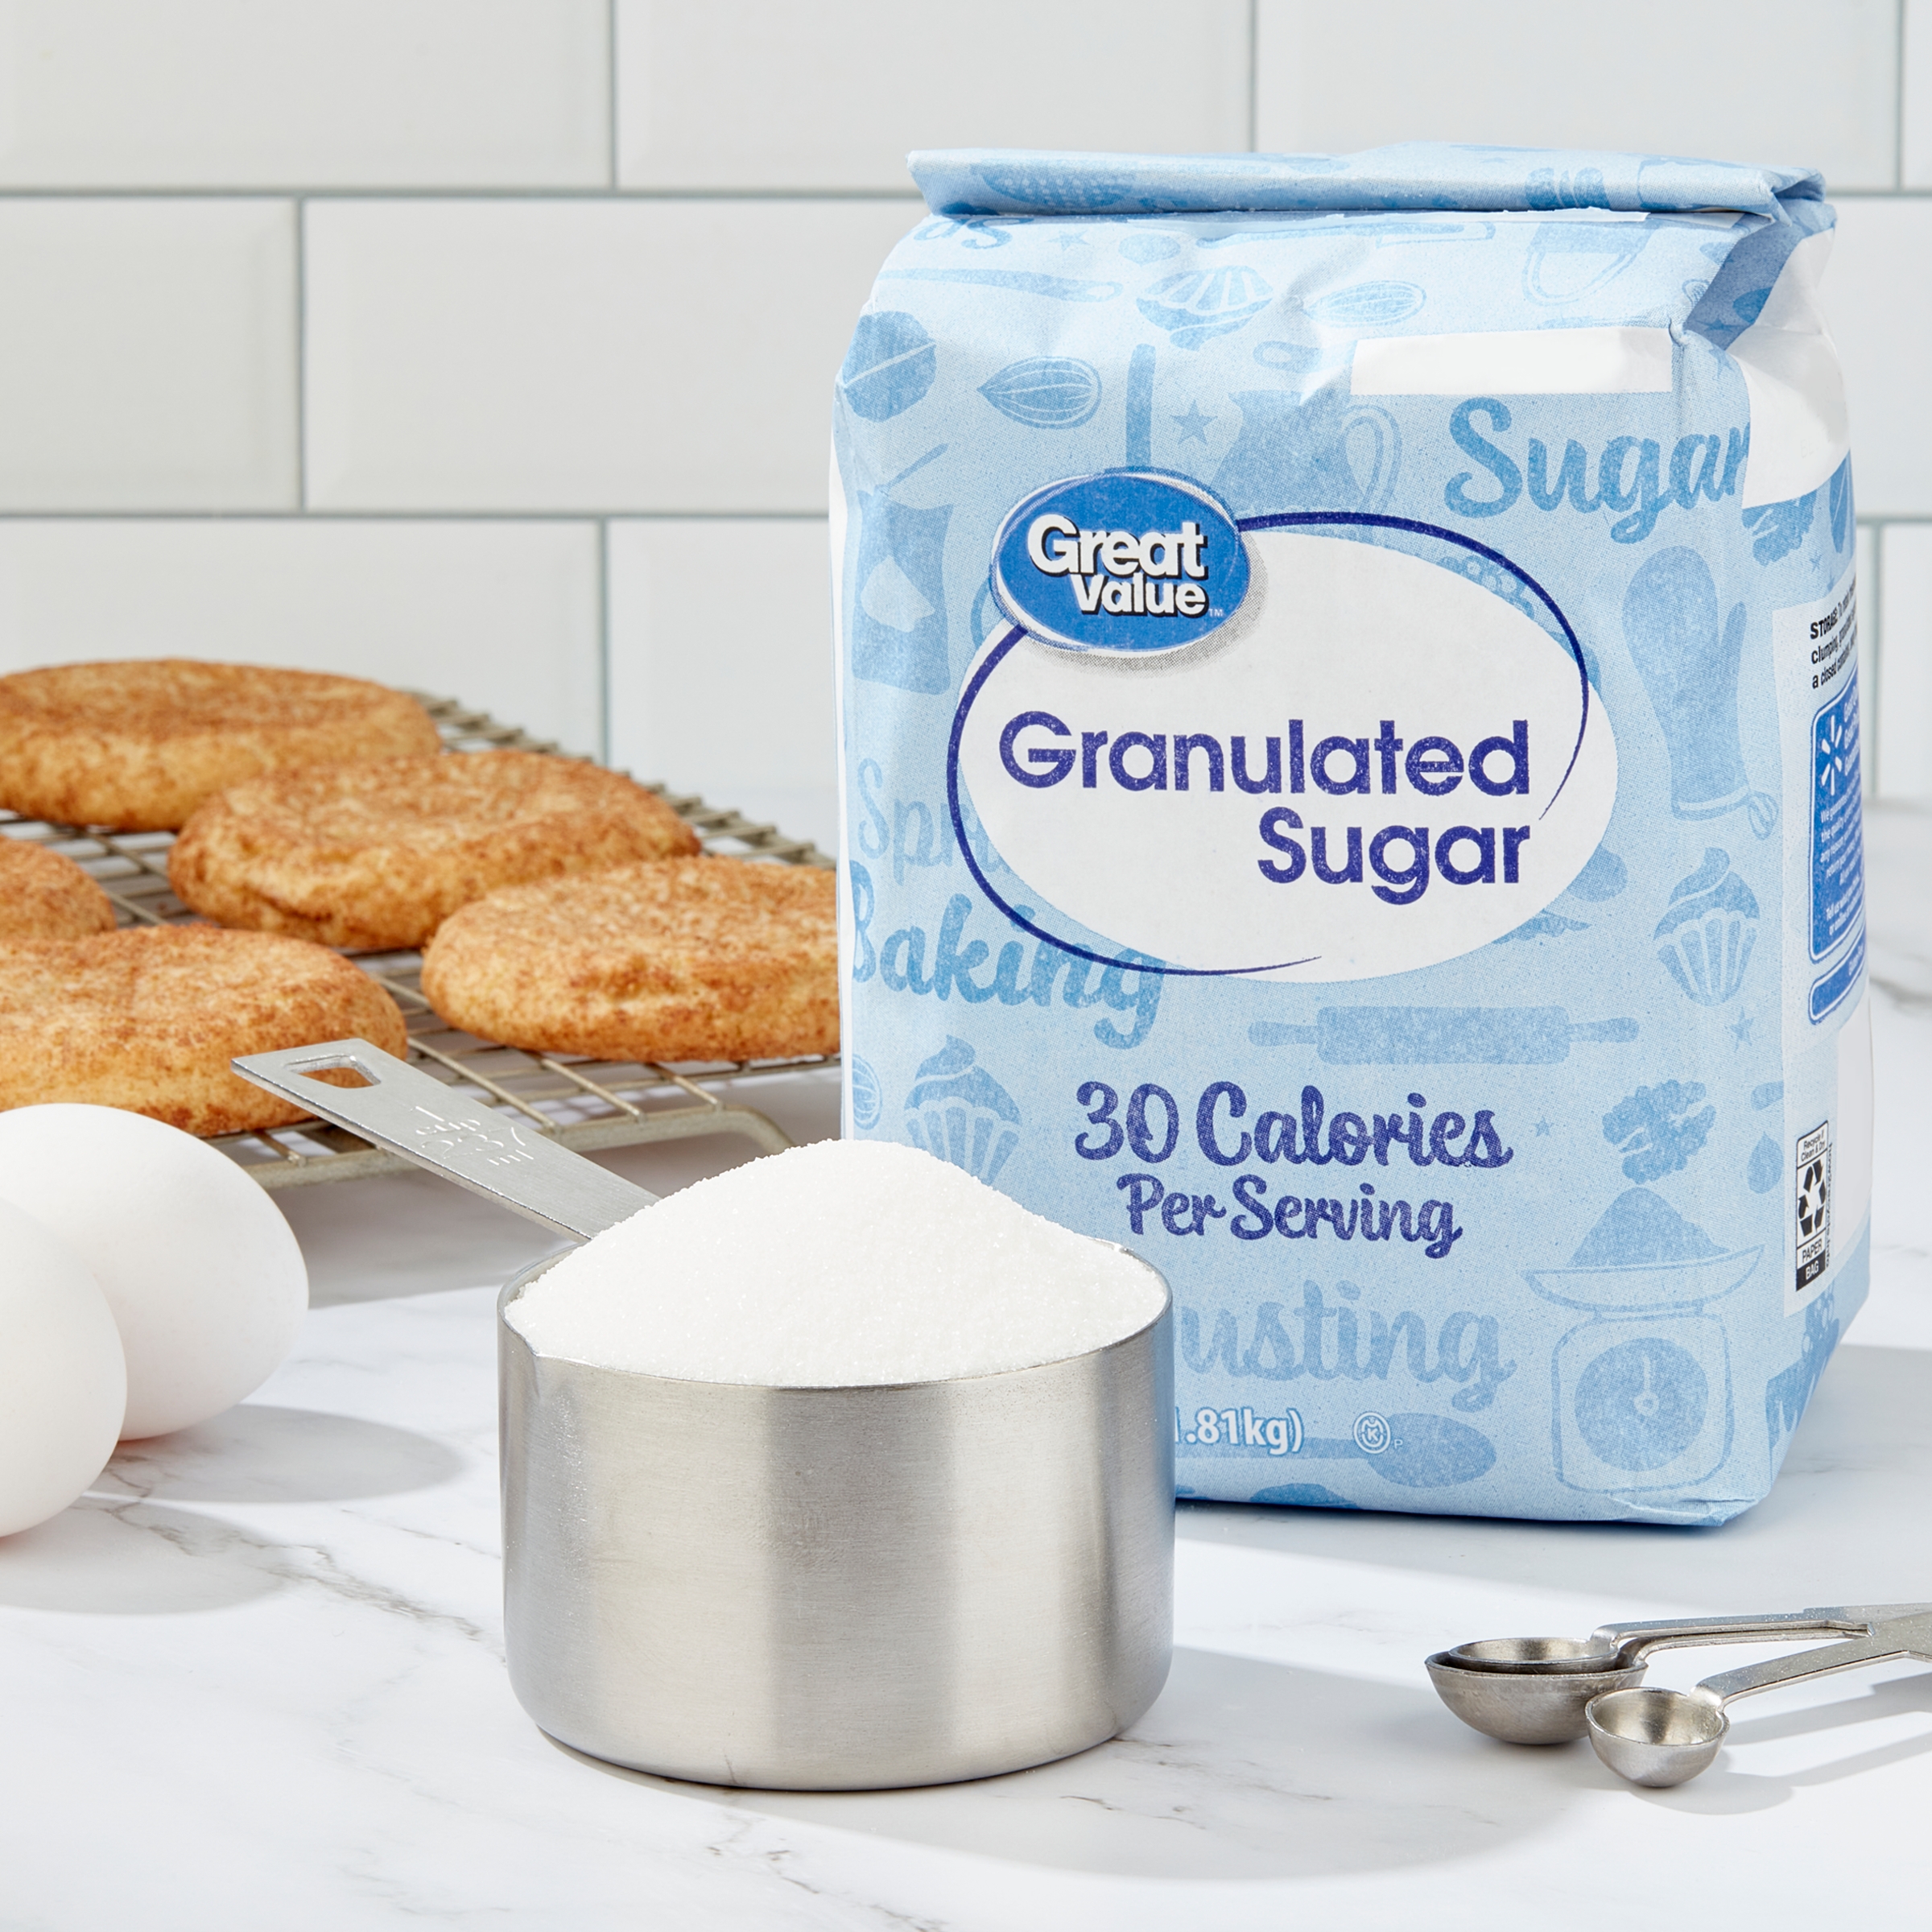 Great Value Pure Granulated Sugar, 4 lb - image 2 of 6